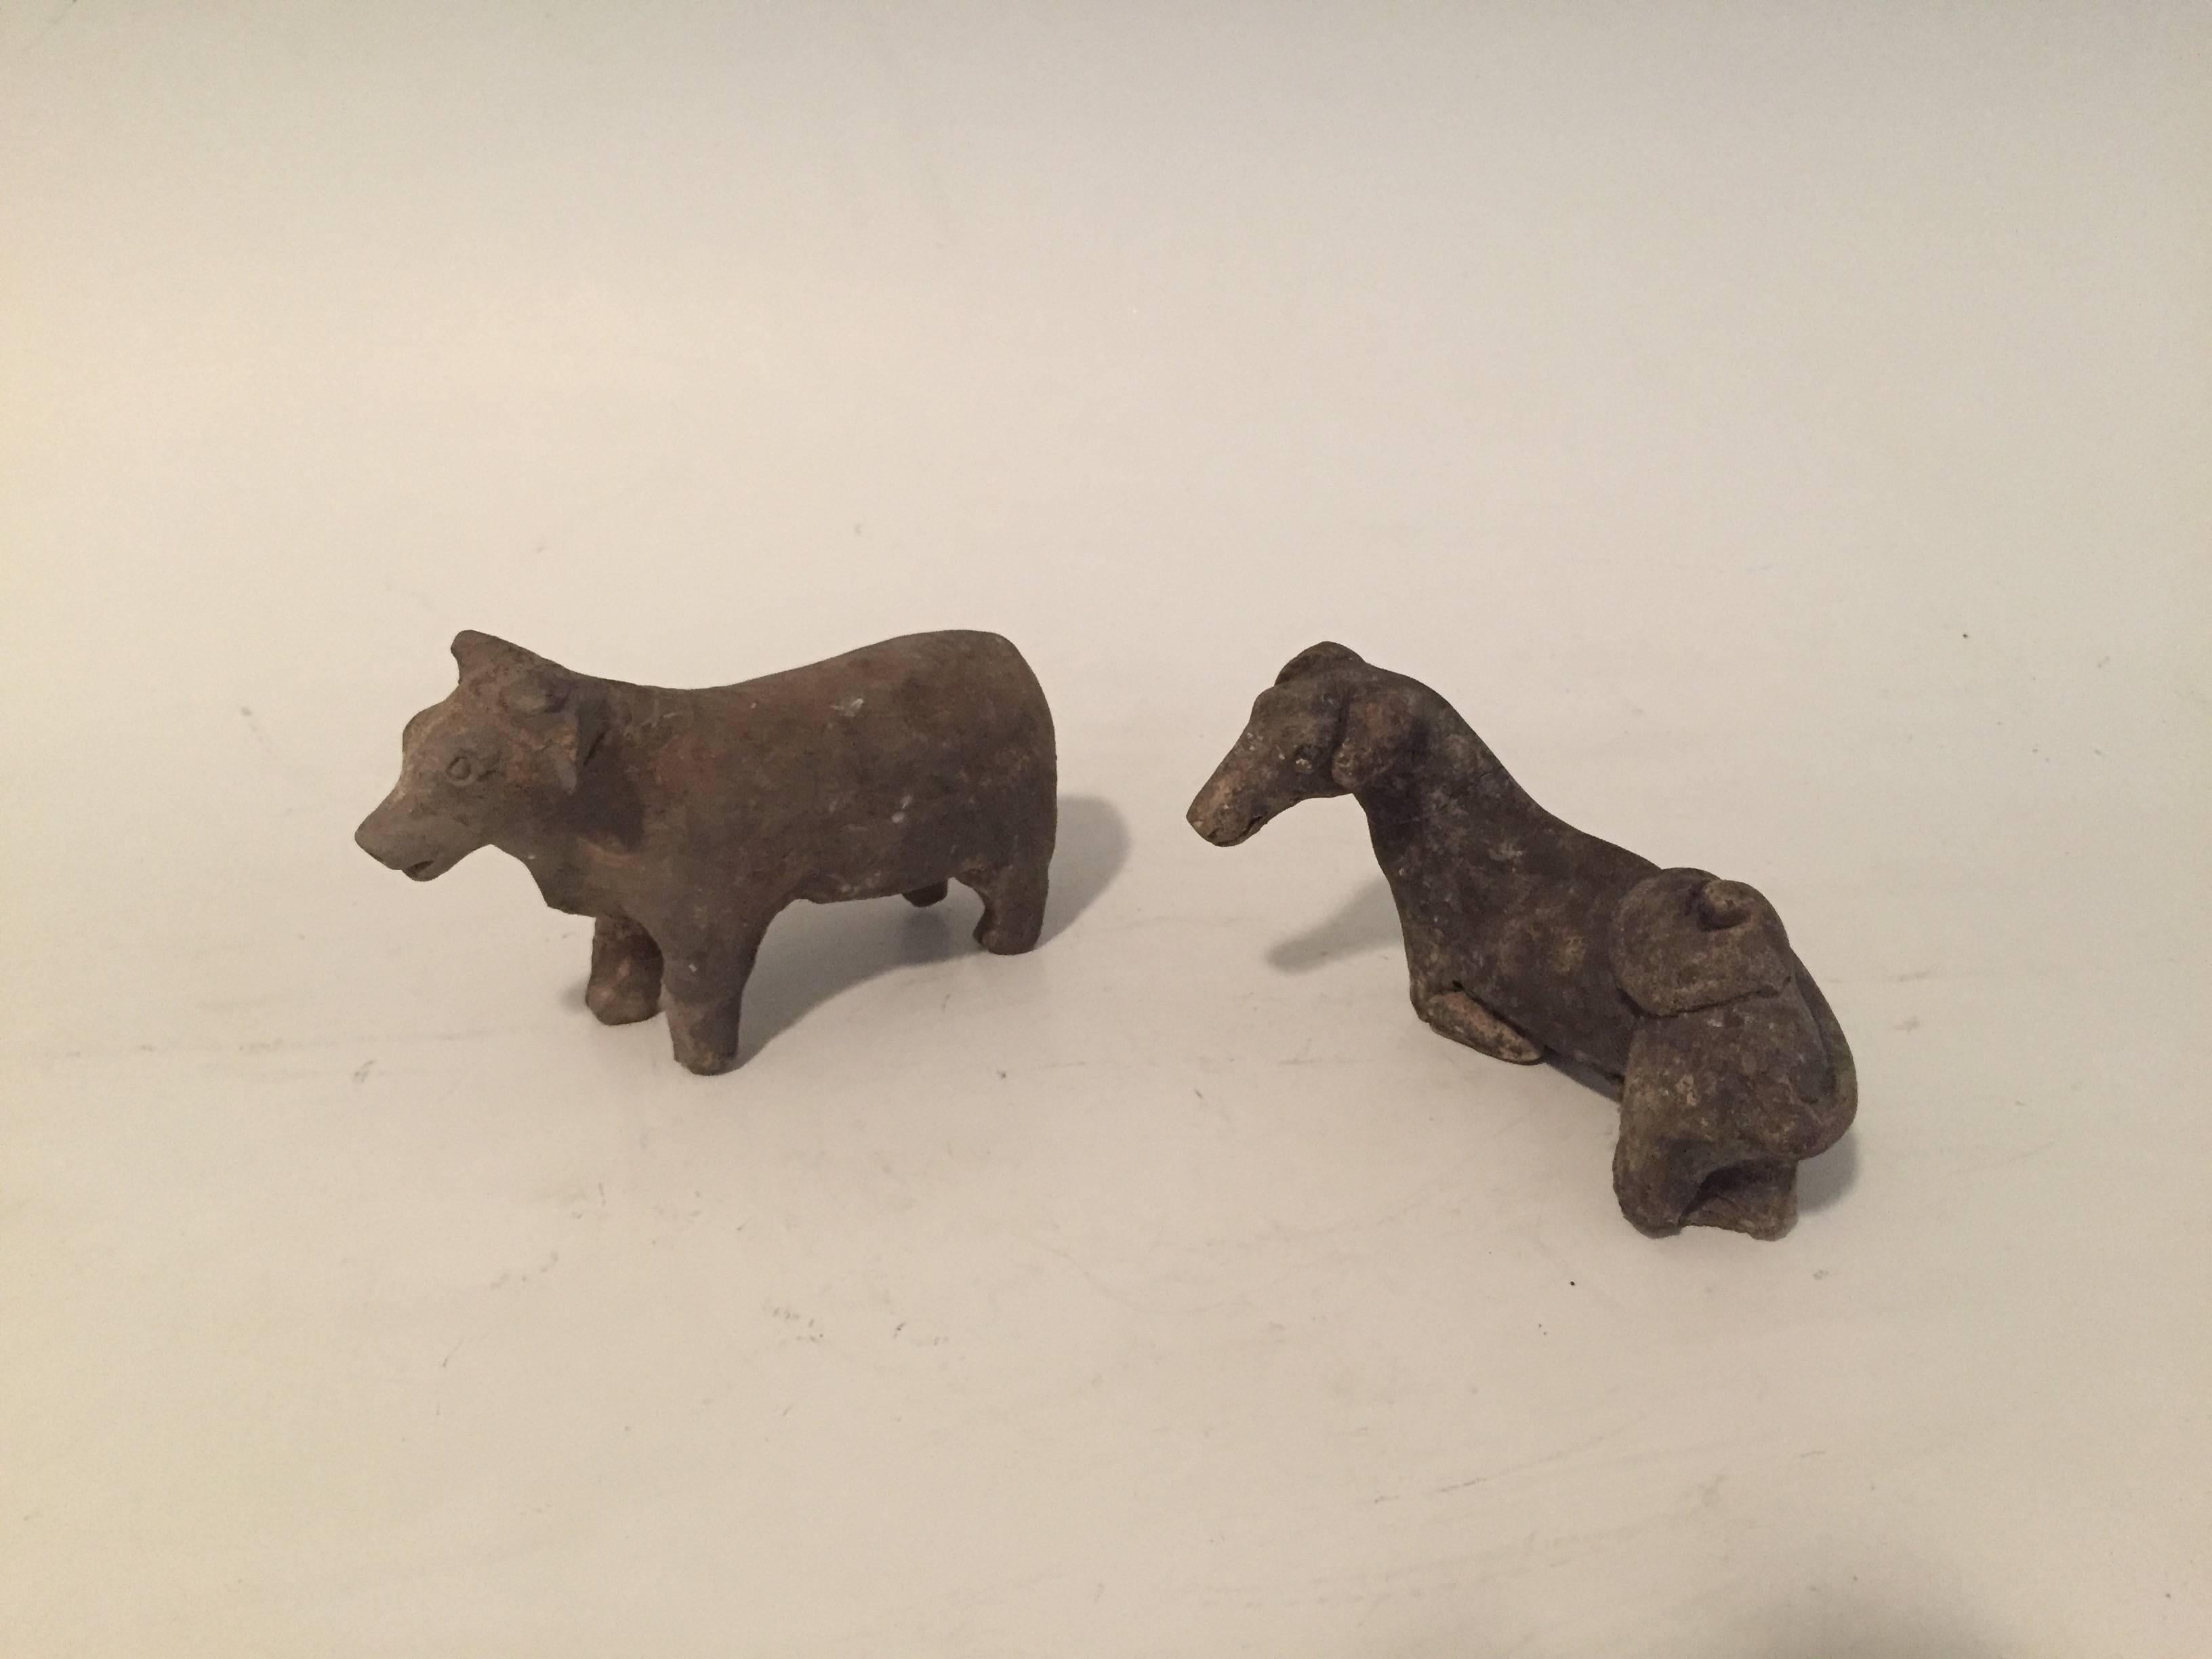 Crudely crafted pair of Han Dynasty (206 B.C. - 220 A.D.) Animals. 
2000 year old animal sculptures presumably of a cow and deer. Made of grey pottery. The cow stands on four legs, while the deer appears to be kneeling on both his front and back